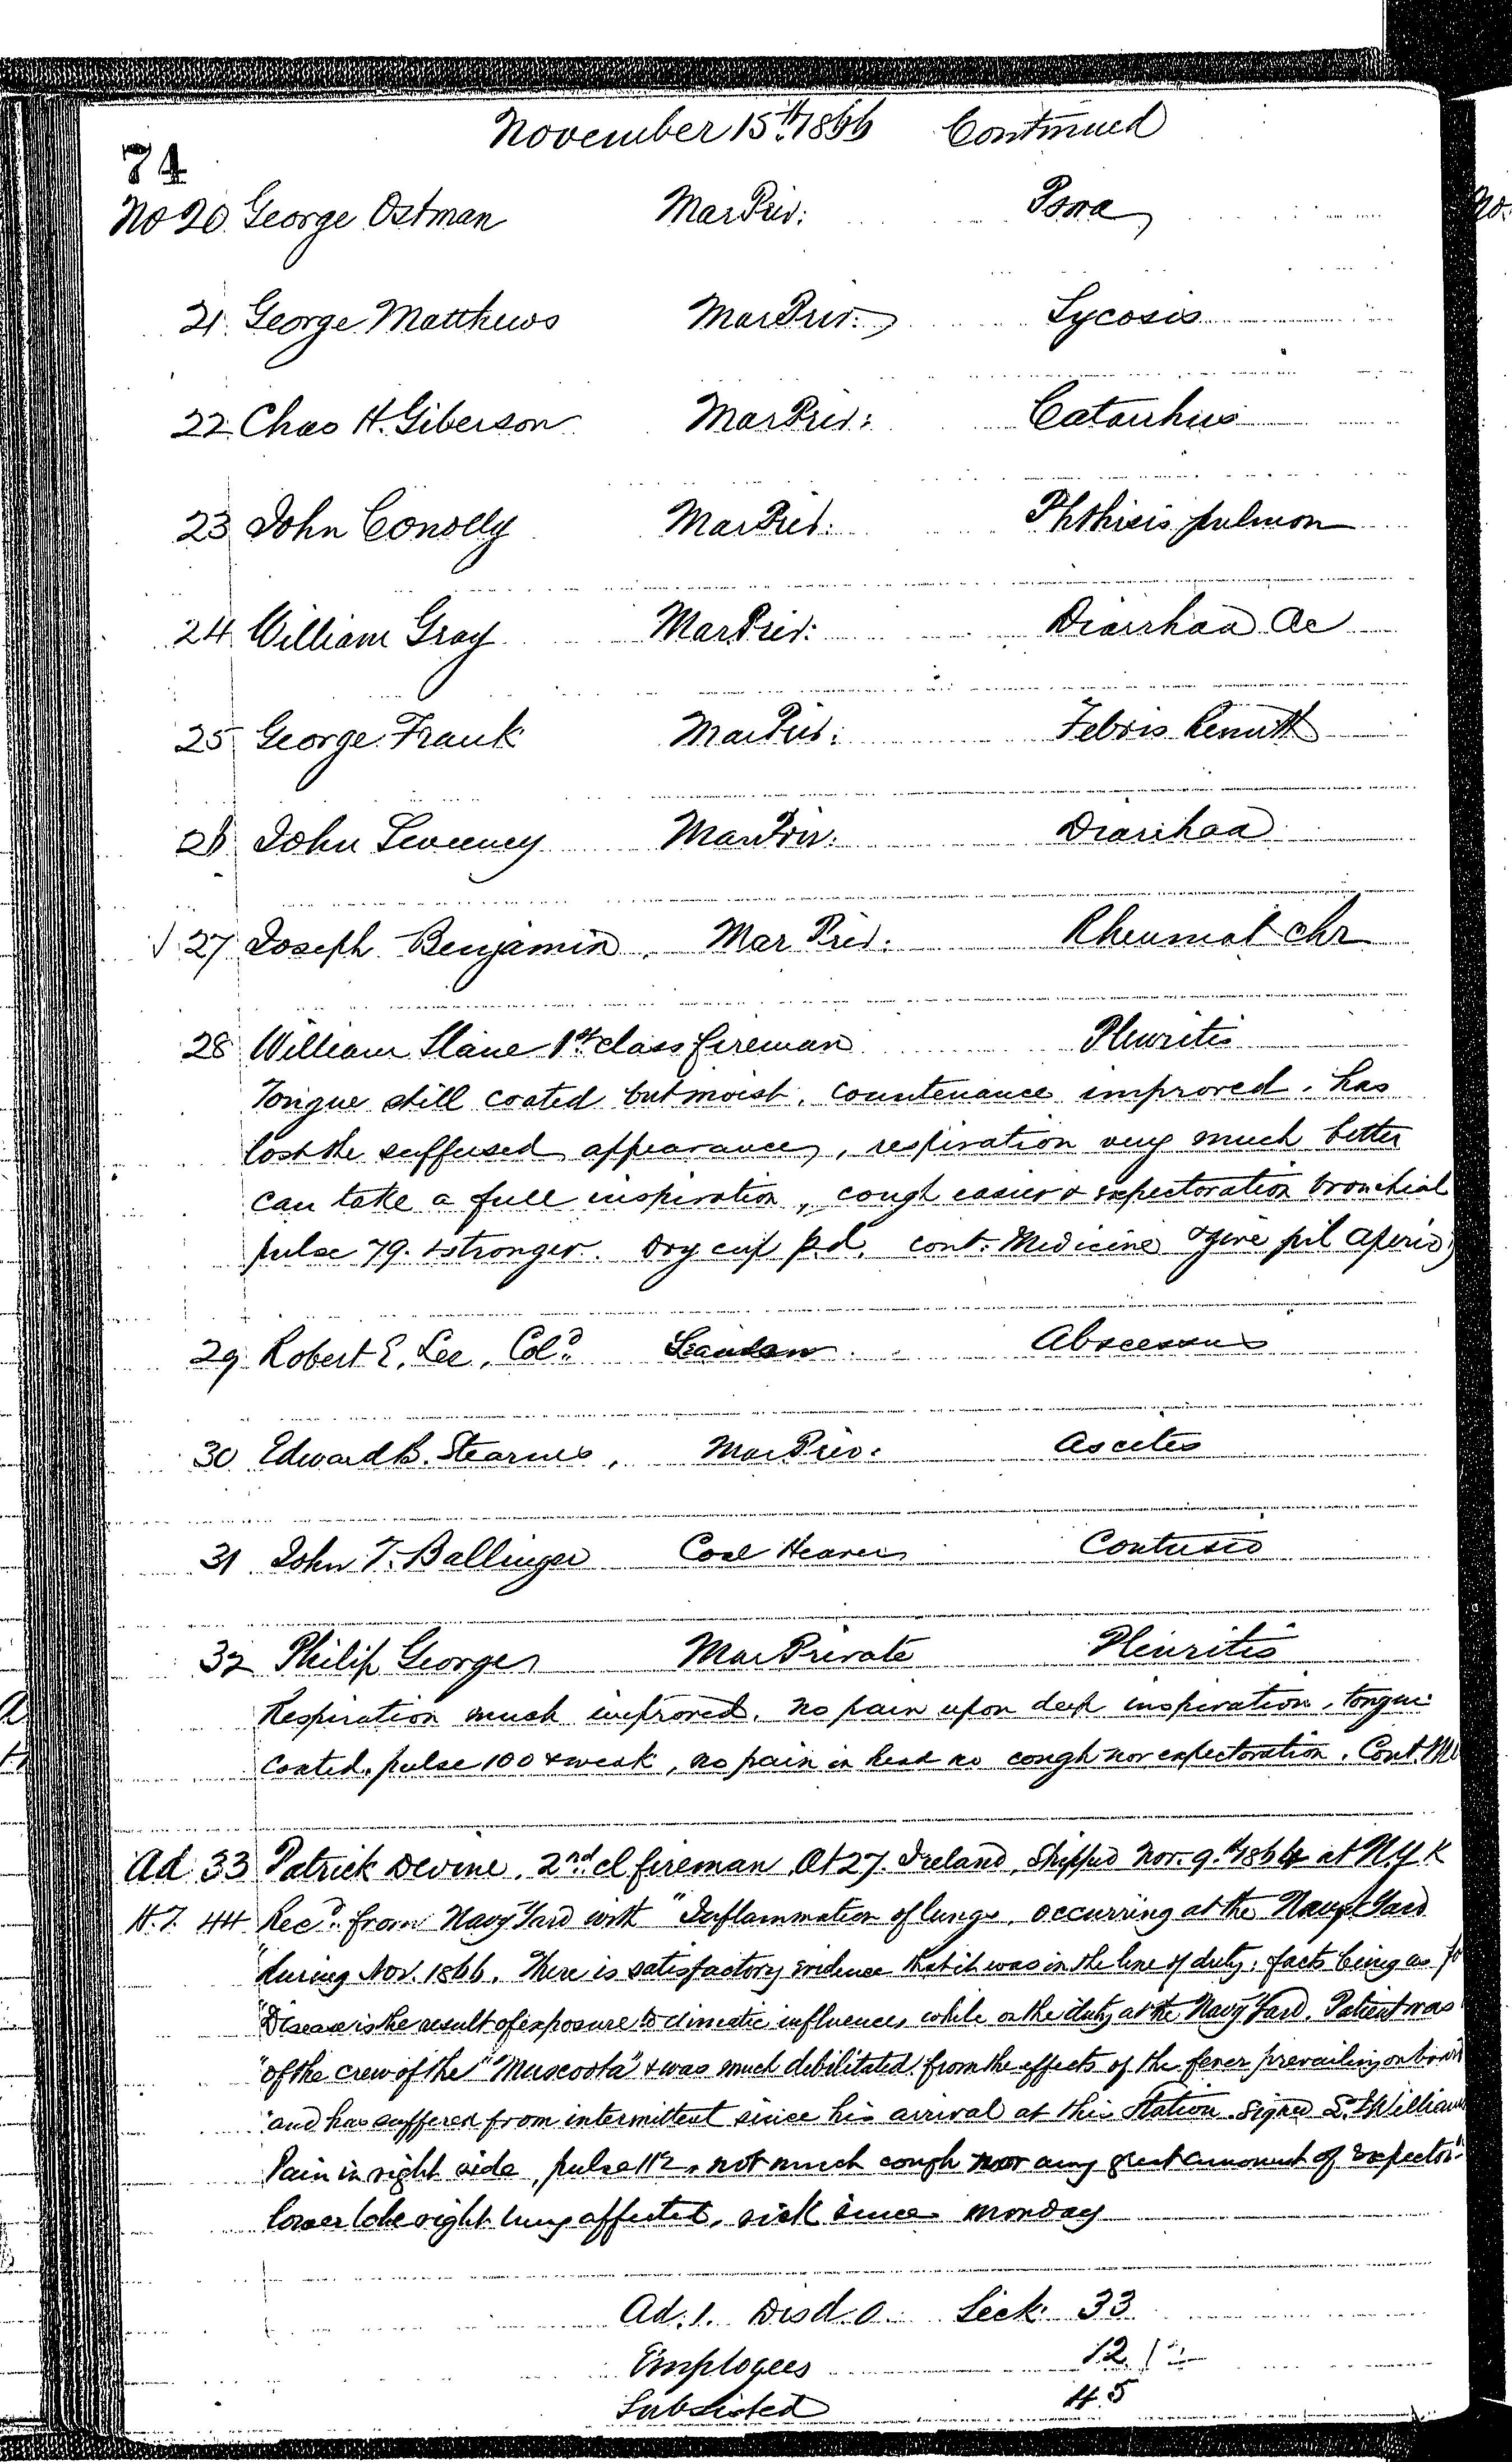 Patients in the Naval Hospital, Washington DC, on November 15, 1866, page 2 of 2, in the Medical Journal, October 1, 1866 to March 20, 1867